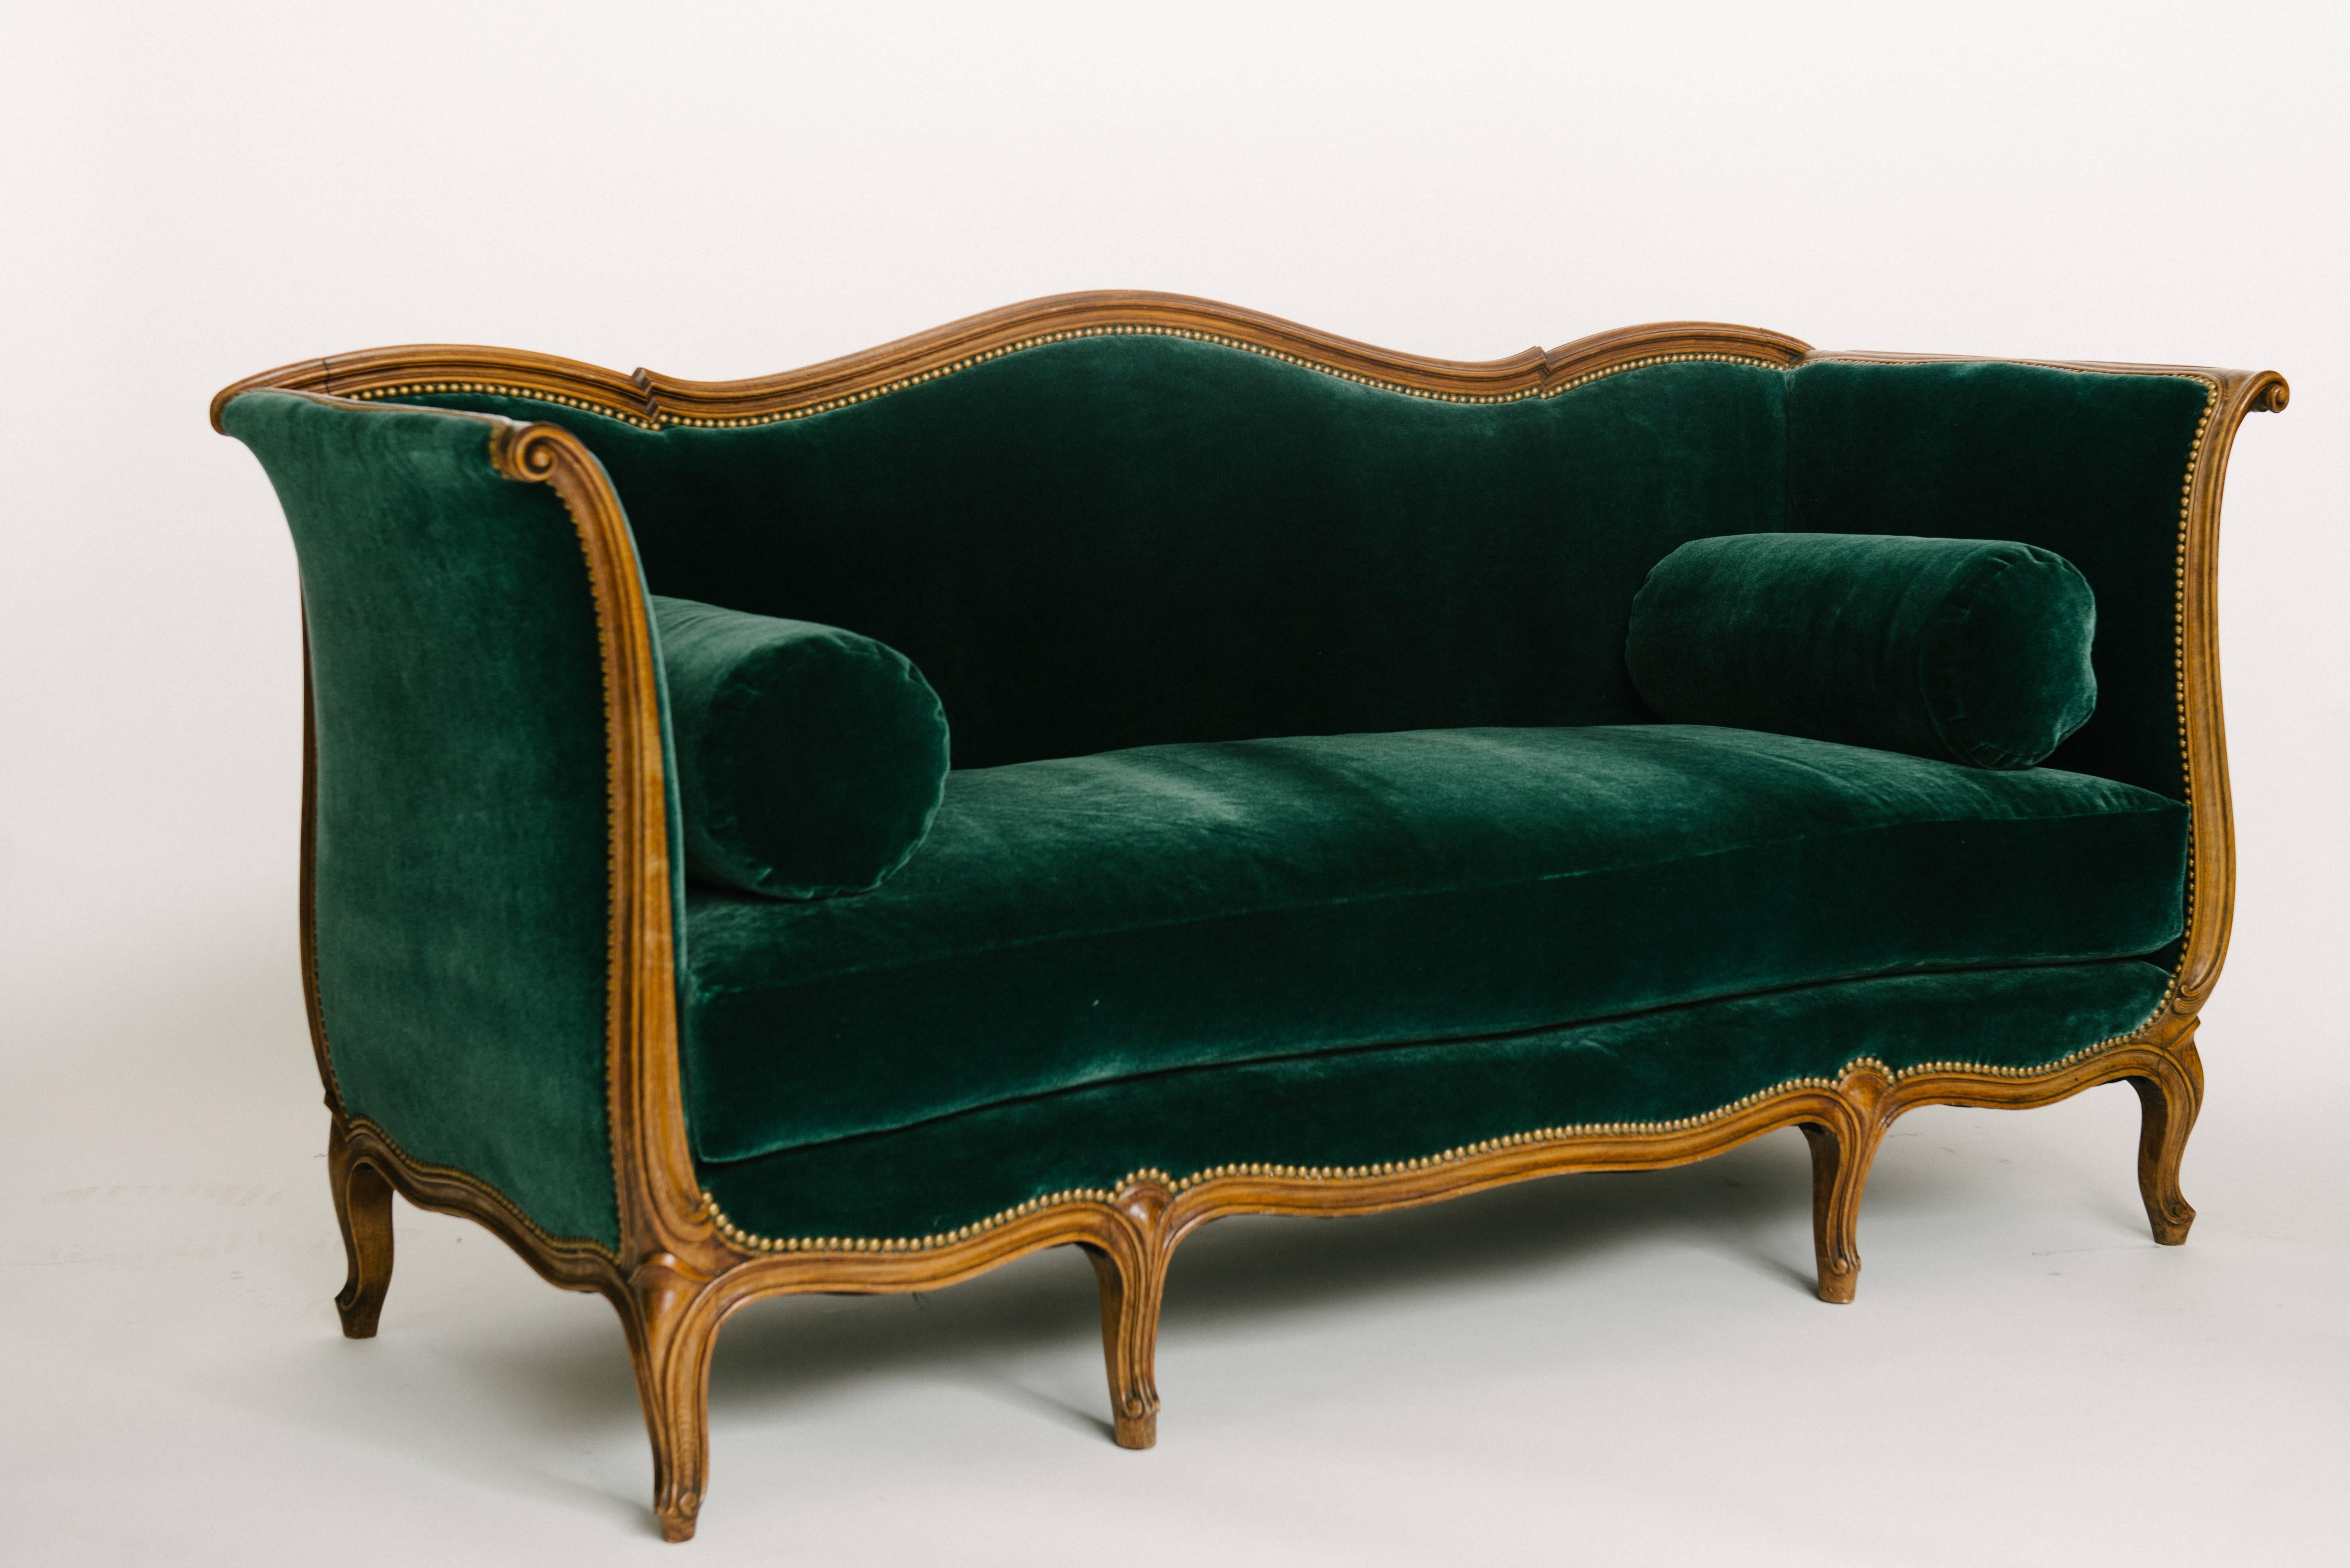 An elegant 19th century carved Louis XV style Sultanes sofa newly reupholstered in an dark emerald green mohair with French nailhead detail. Seat is fabricated with feather/down wrapped spring coil cushion.